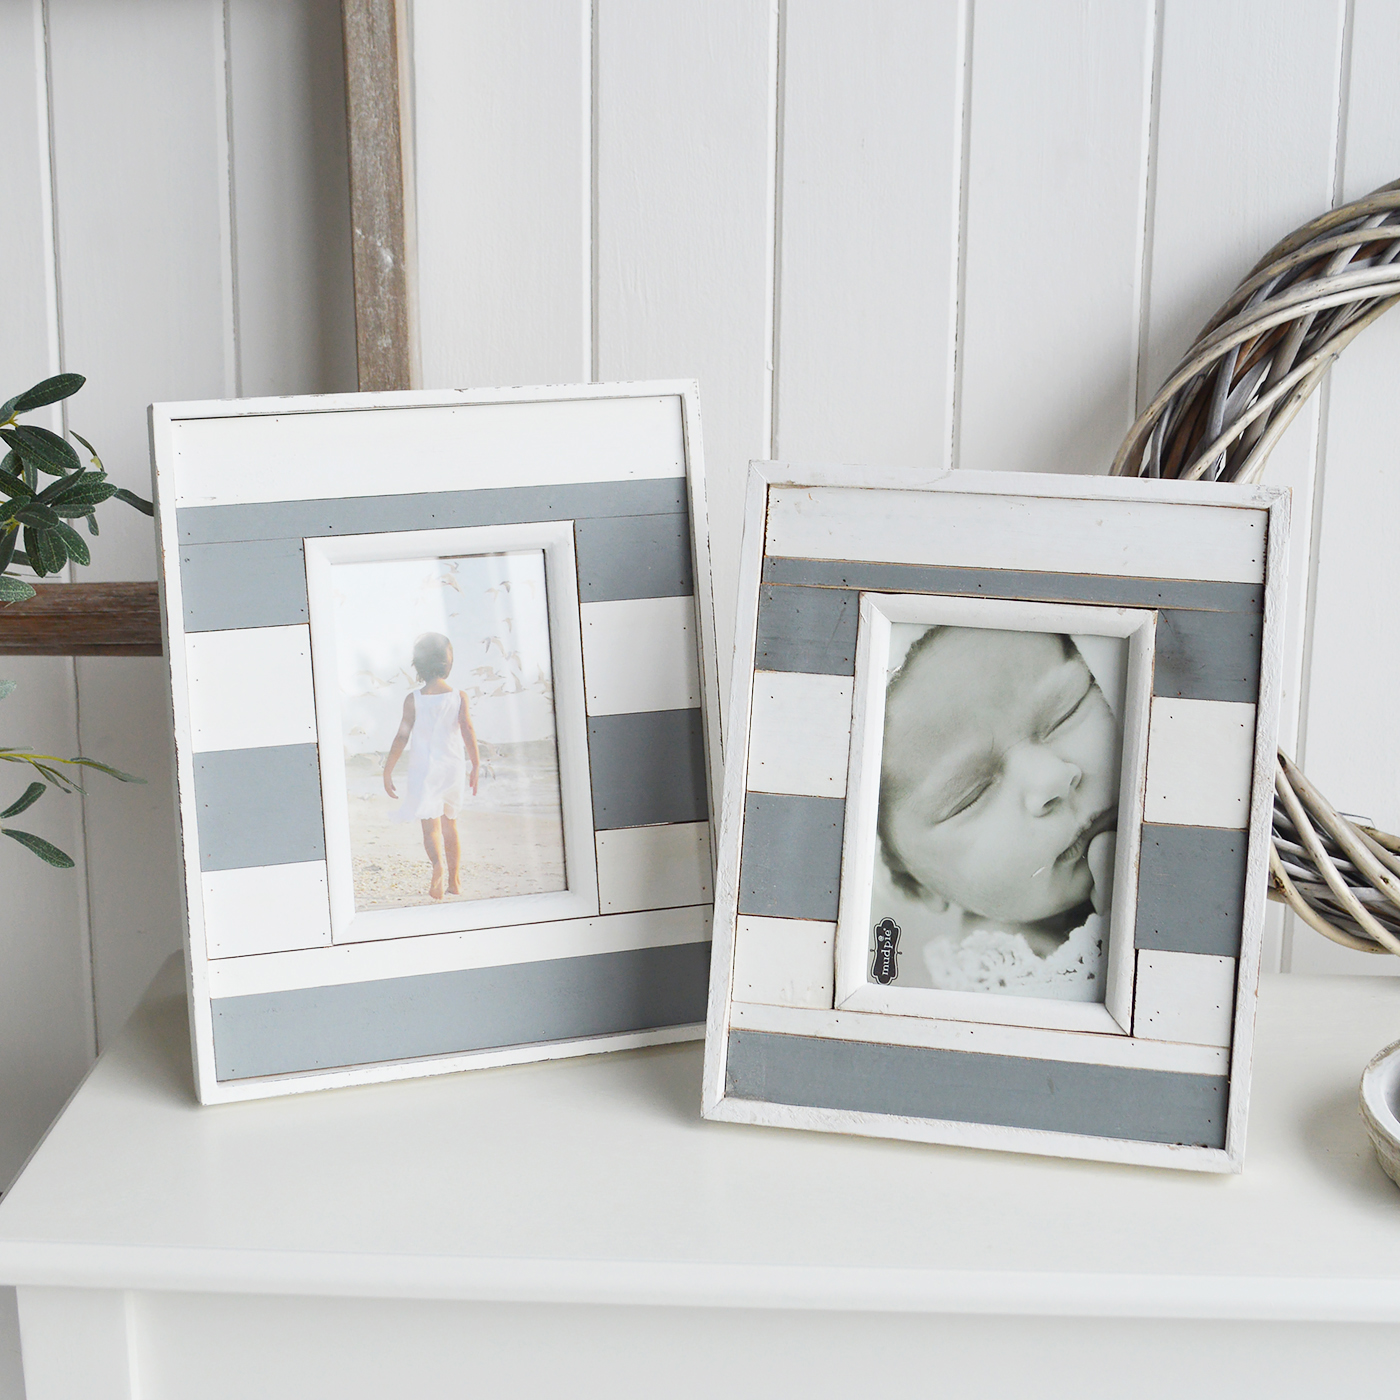 Weston Photo Frames - New England Coastal, Farmhouse, City and Country Furniture Homes and Interiors